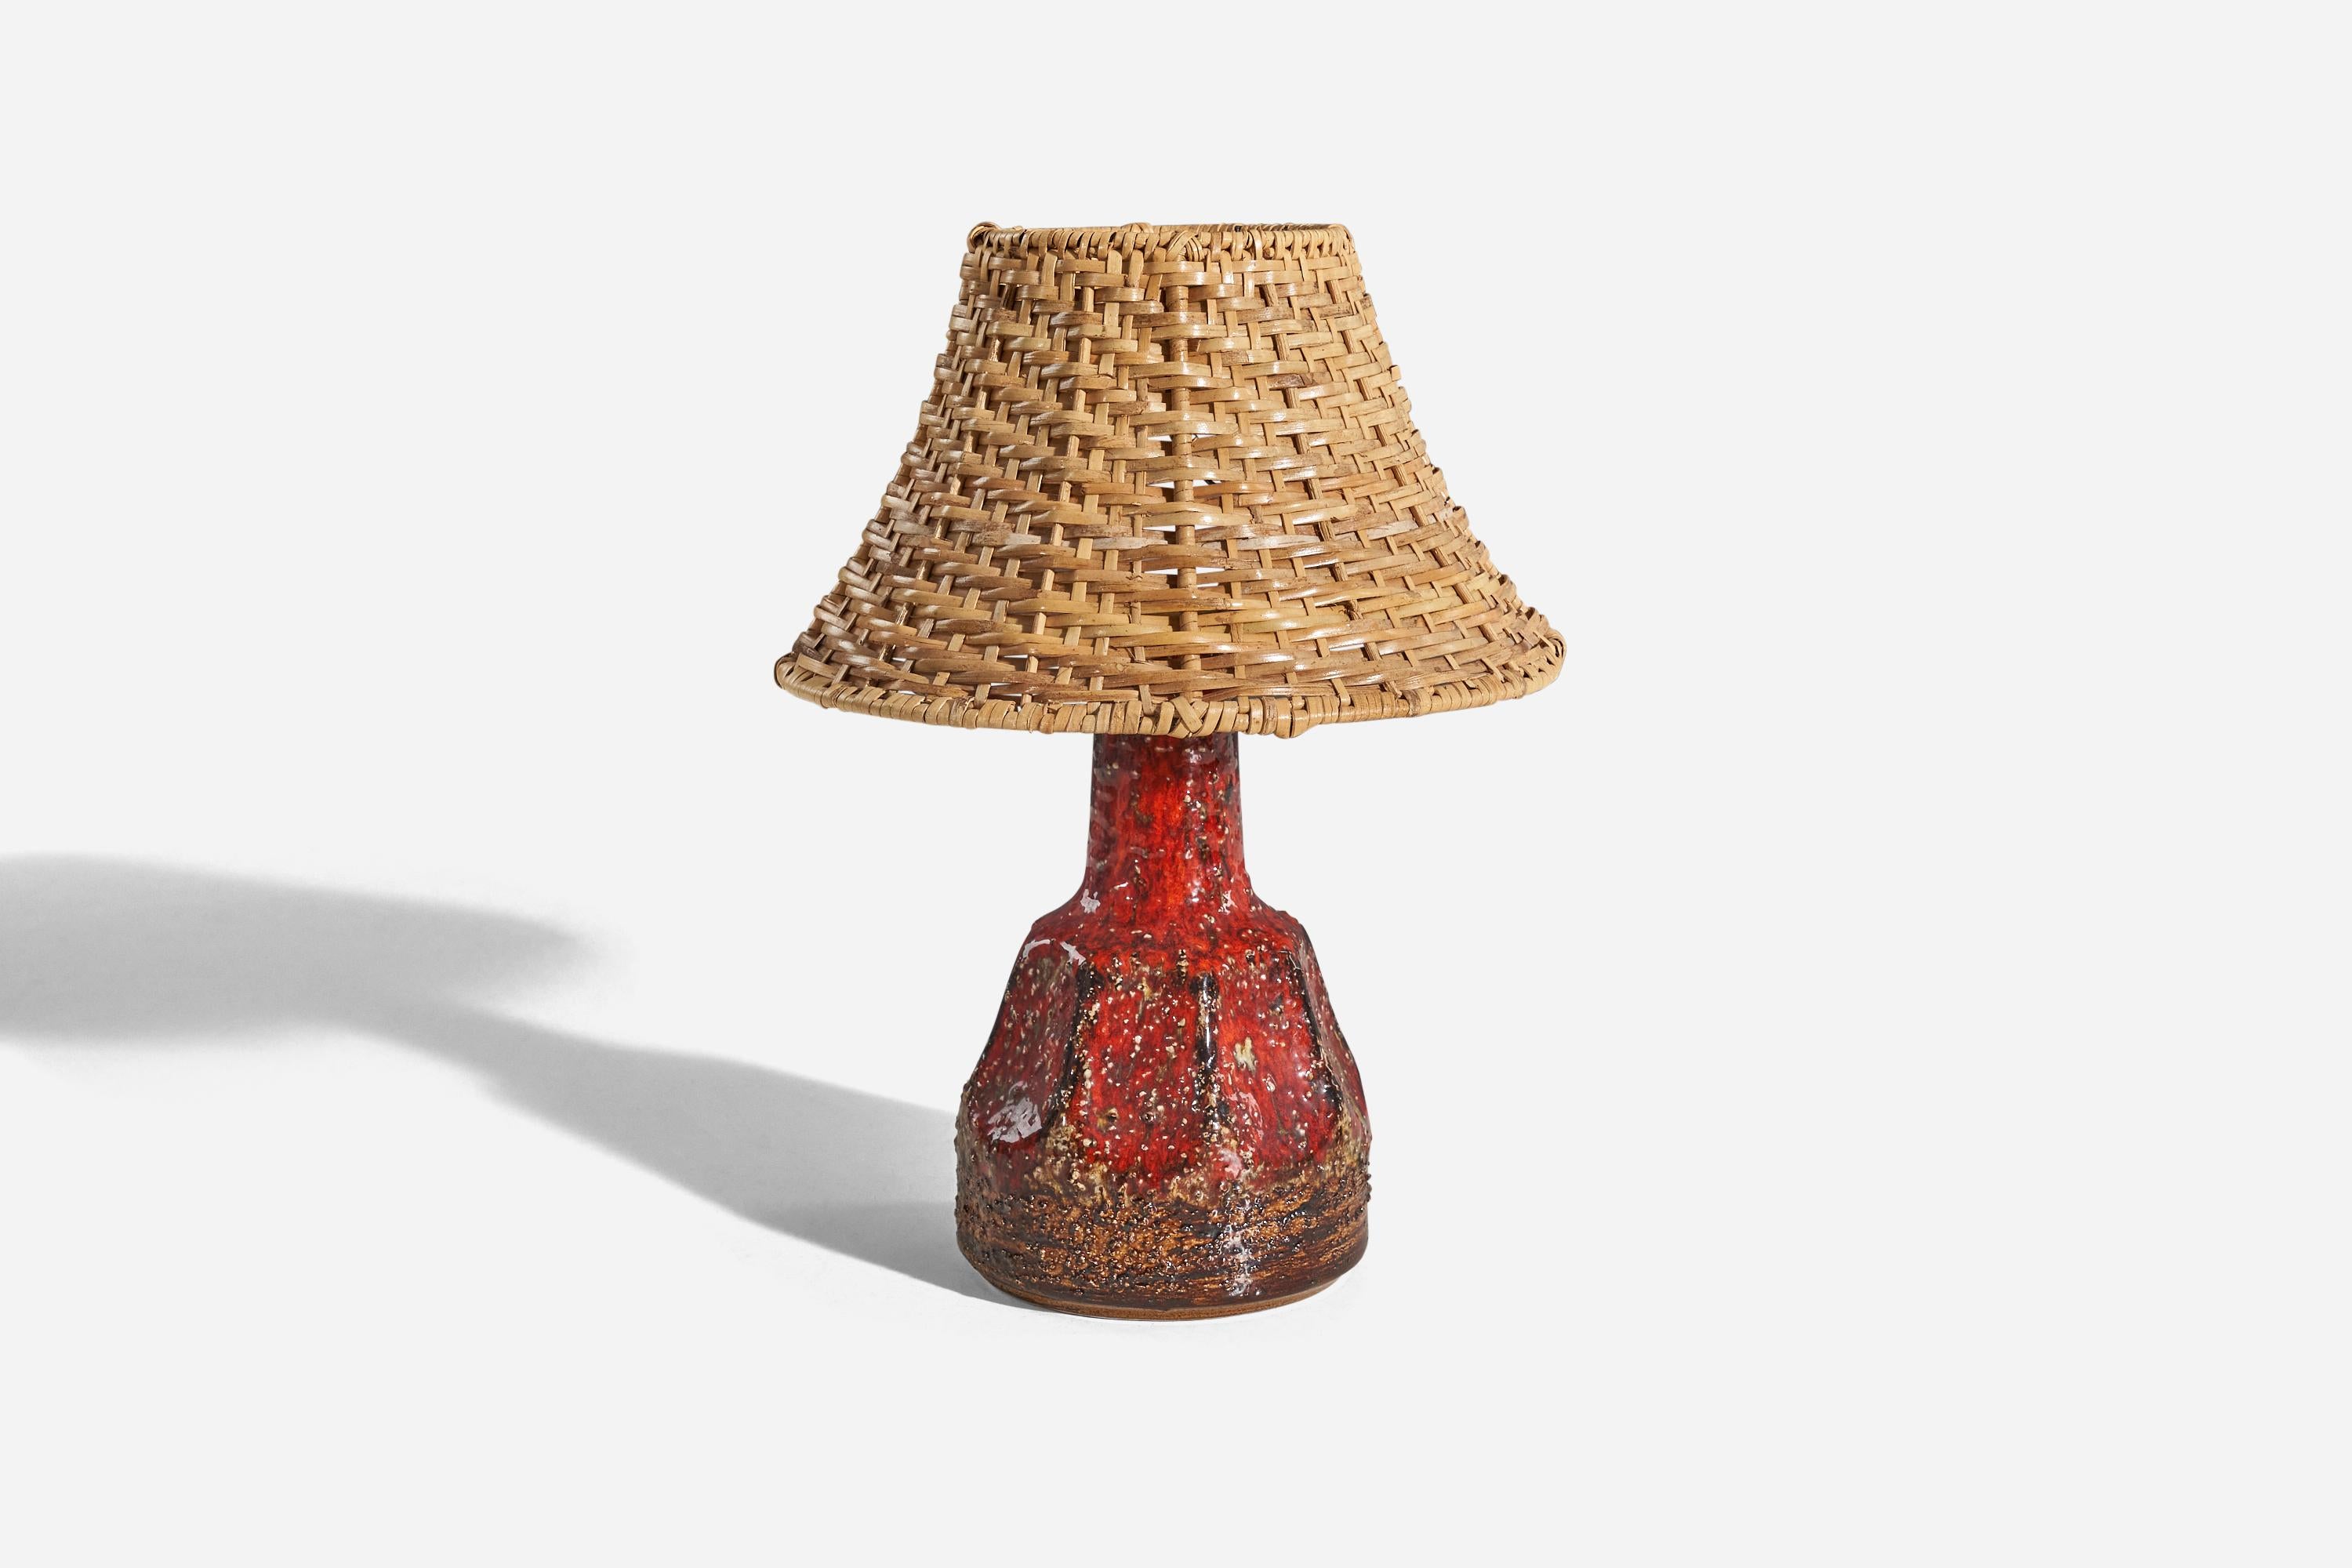 A red, glazed stoneware table lamp designed and produced in Sweden, c. 1960s. 

Sold without lampshade. 
Dimensions of lamp (inches) : 10 x 4.79 x 4.79 (H x W x D)
Dimensions of shade (inches) : 4 x 8.75 x 5.5 (T x B x S)
Dimension of lamp with